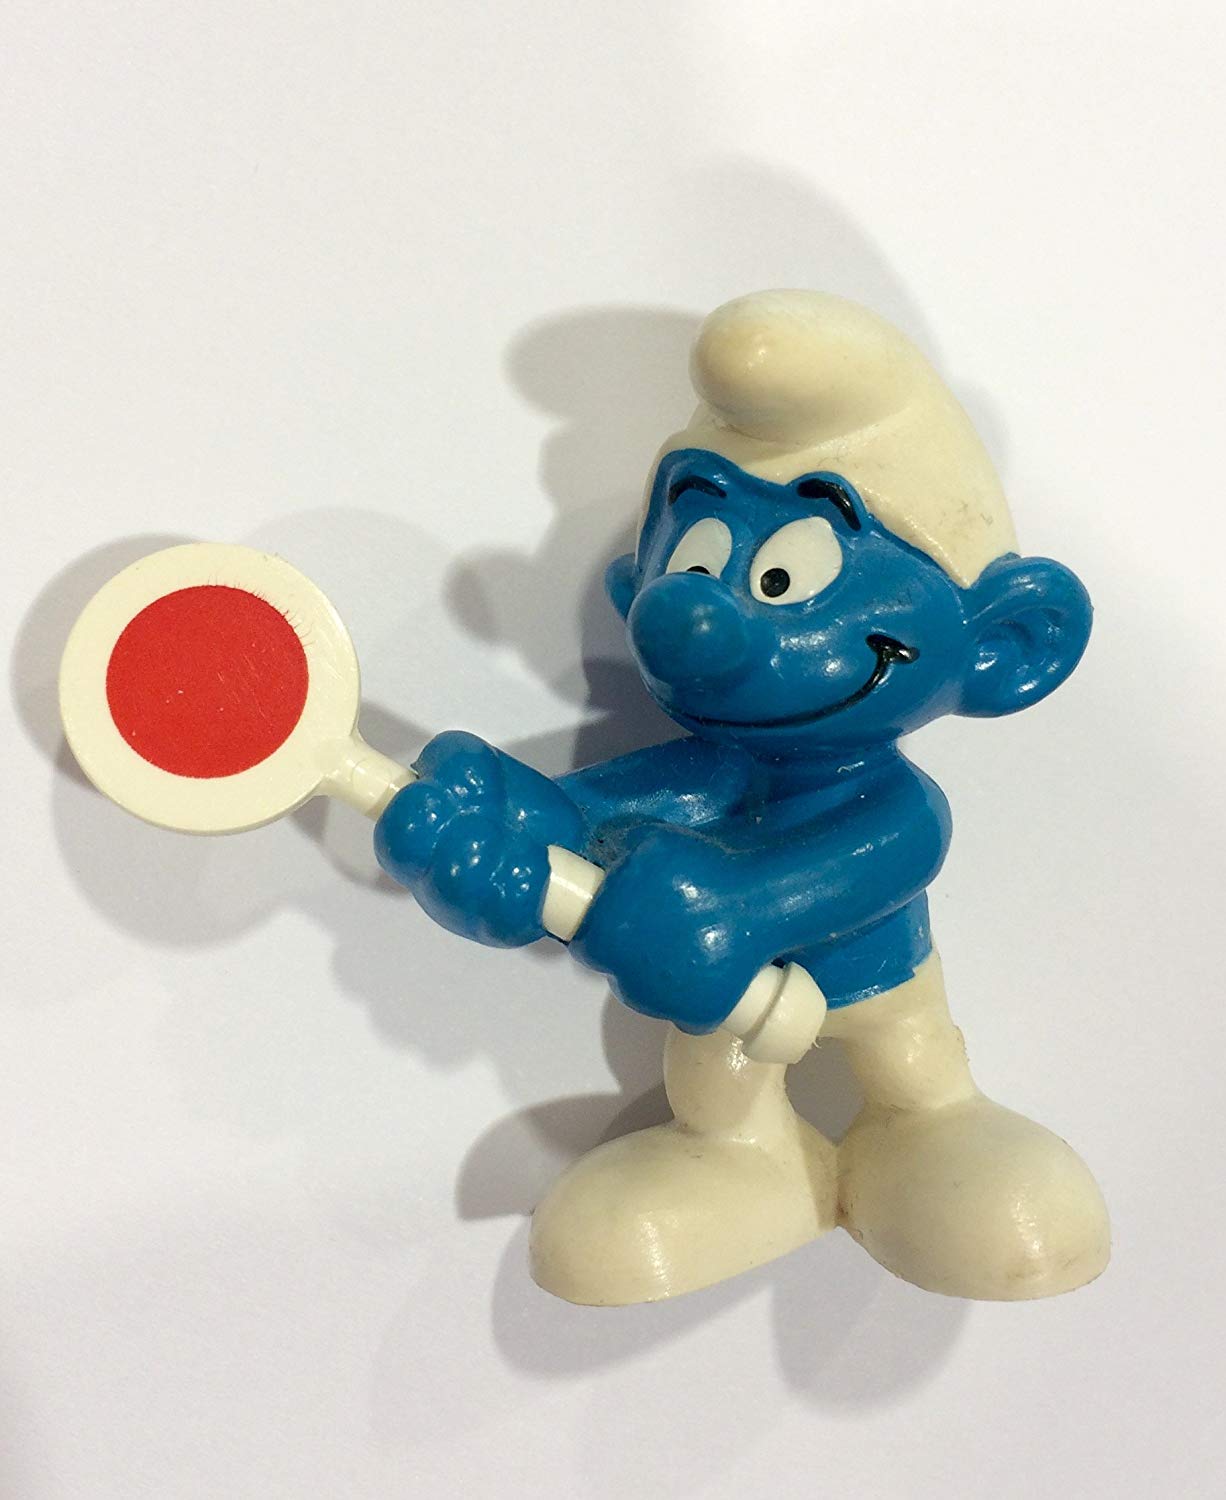 Schleich 20154 – The Smurfs, Students Guides